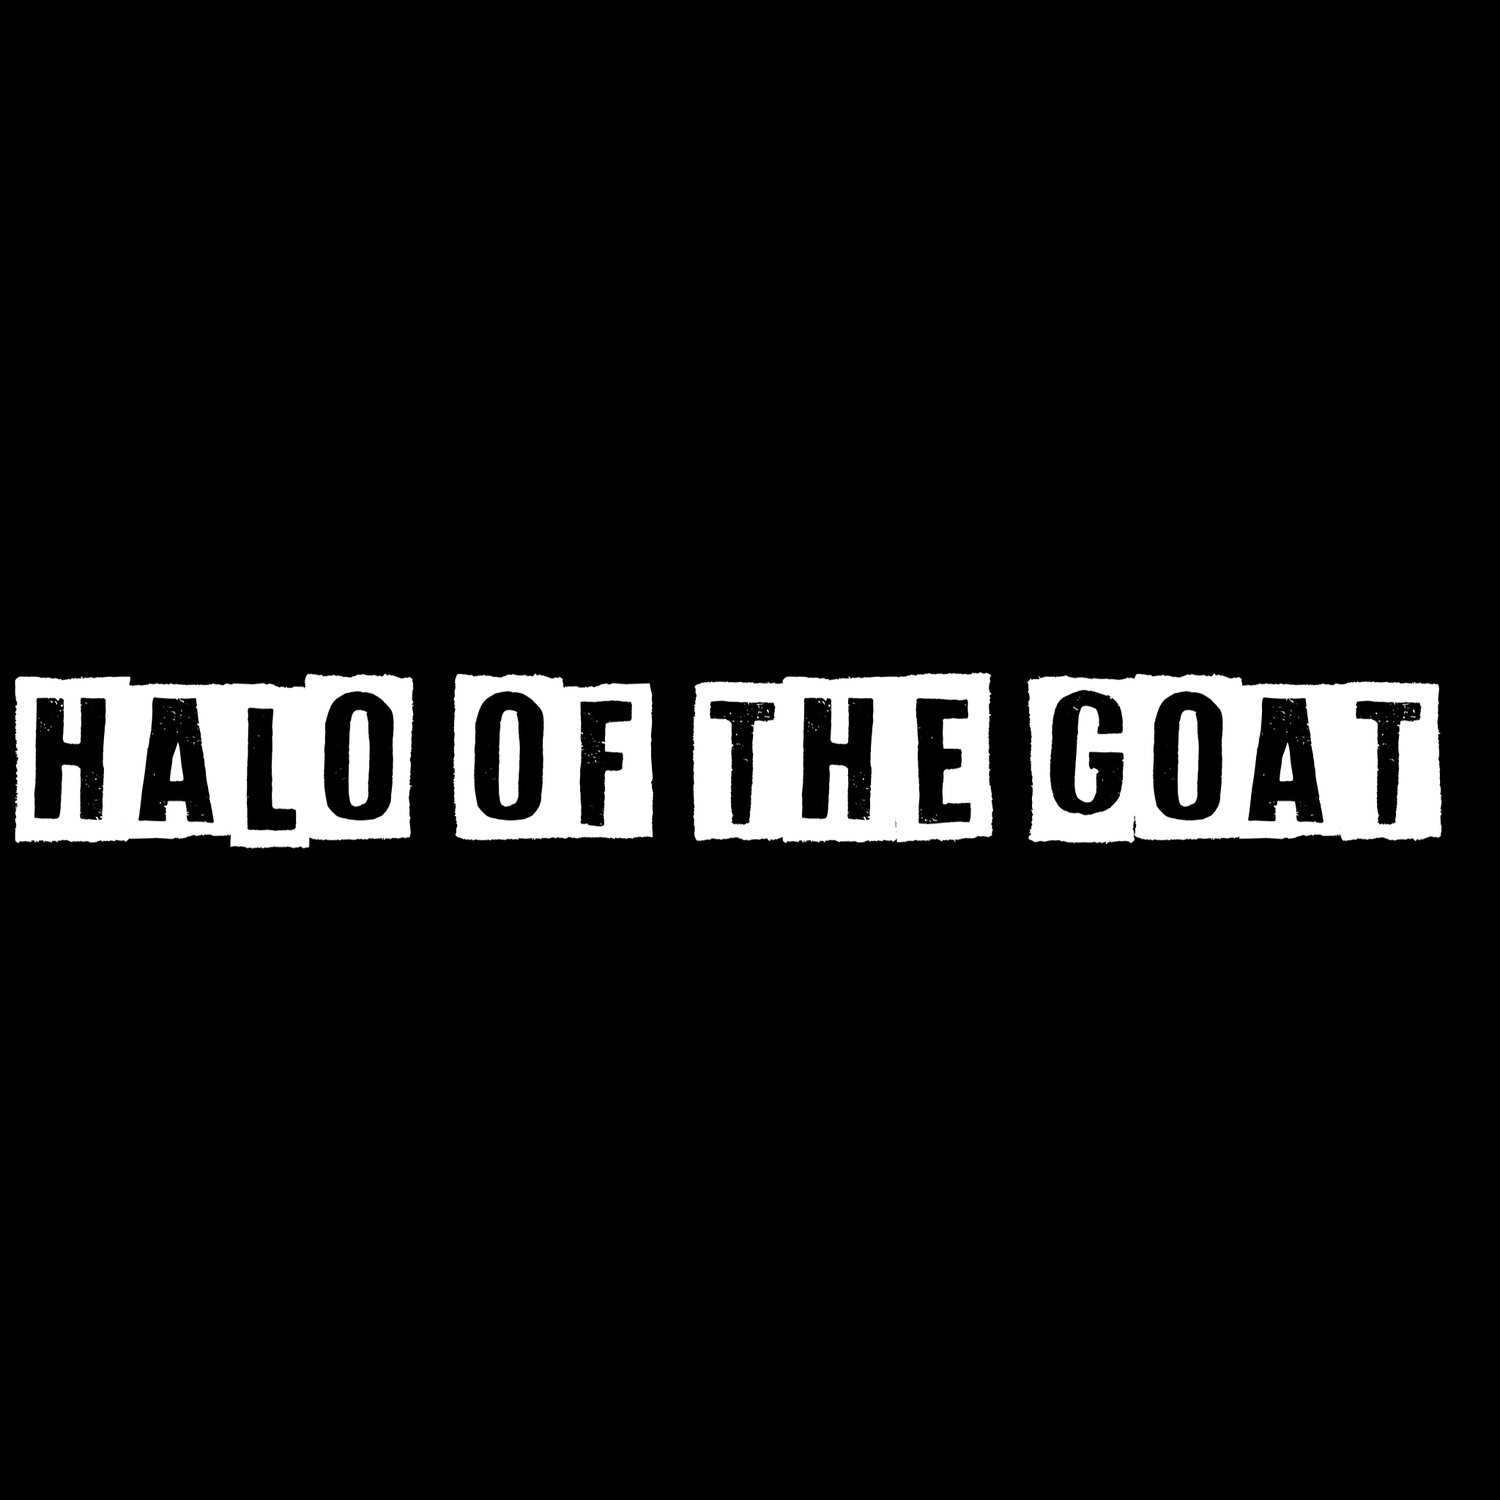 Halo of the Goat